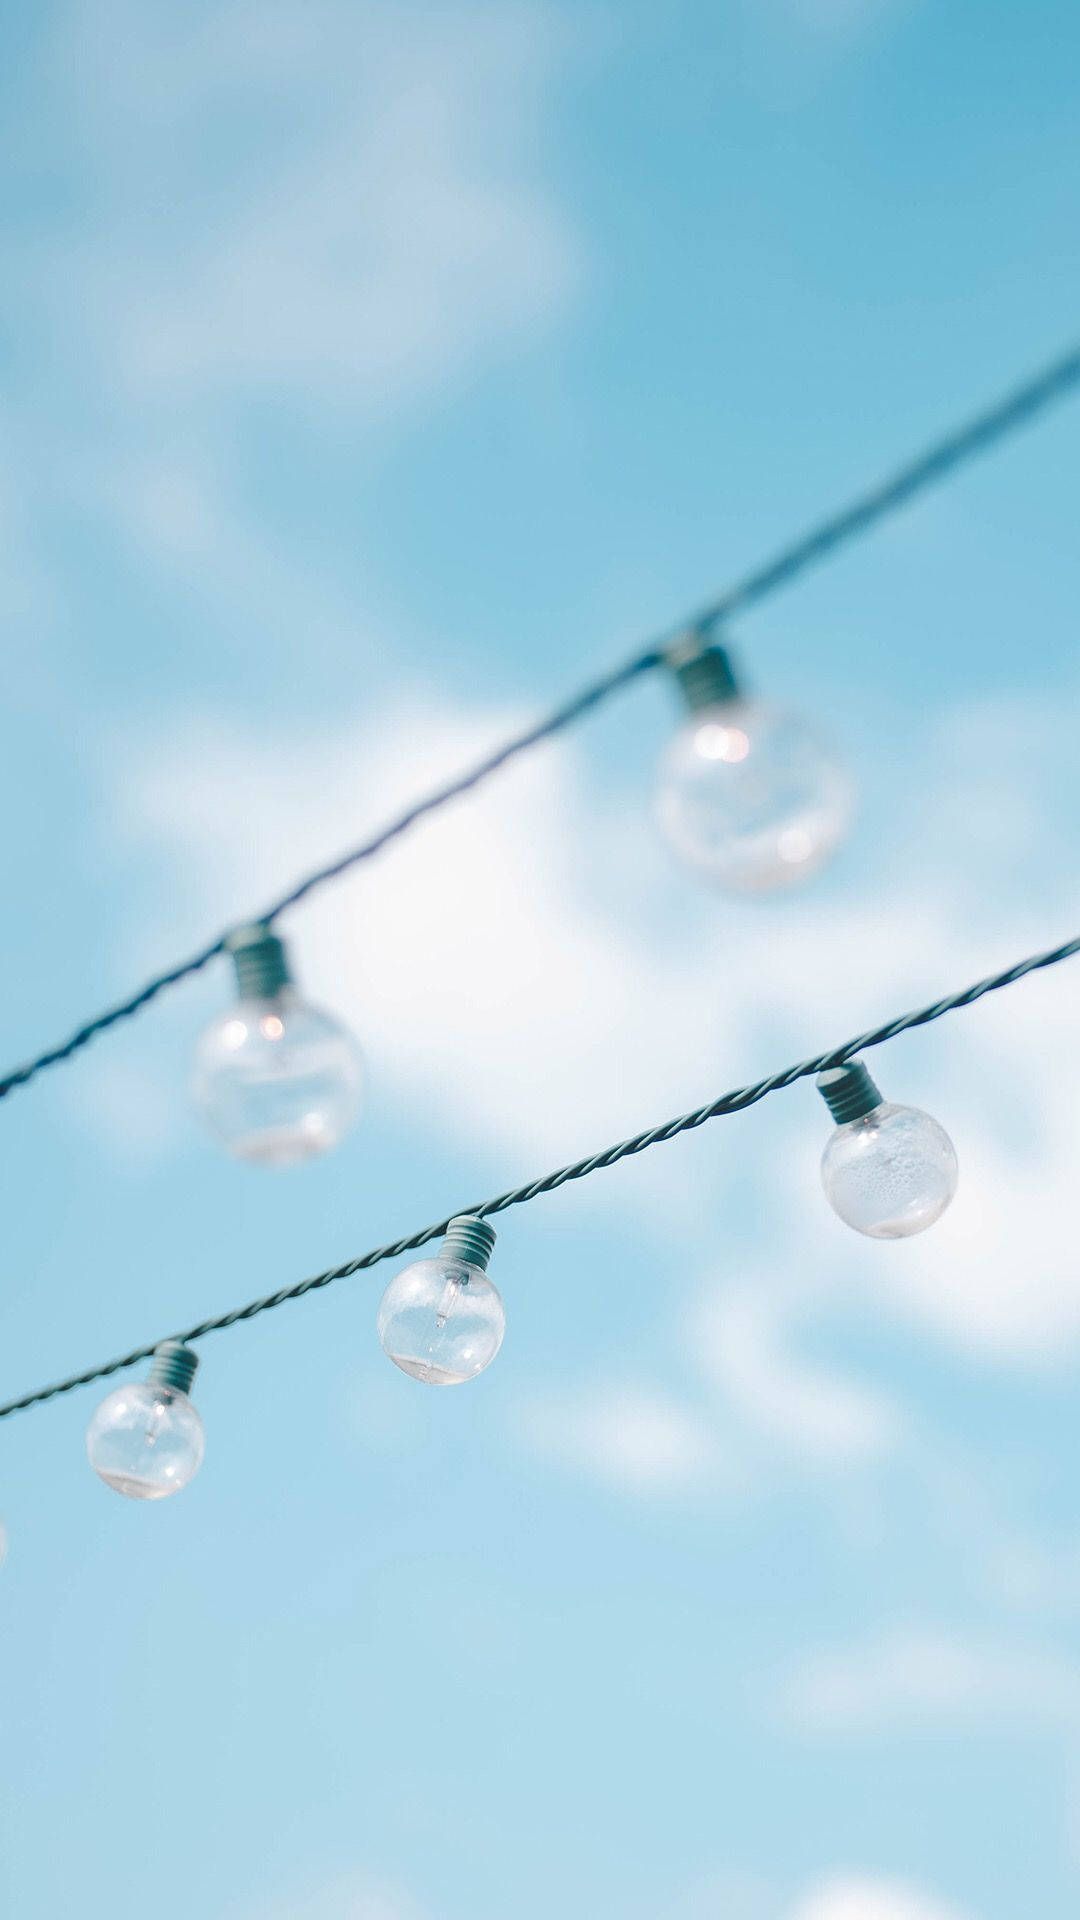 A string of lights hanging from the sky - Blue, light blue, pastel blue